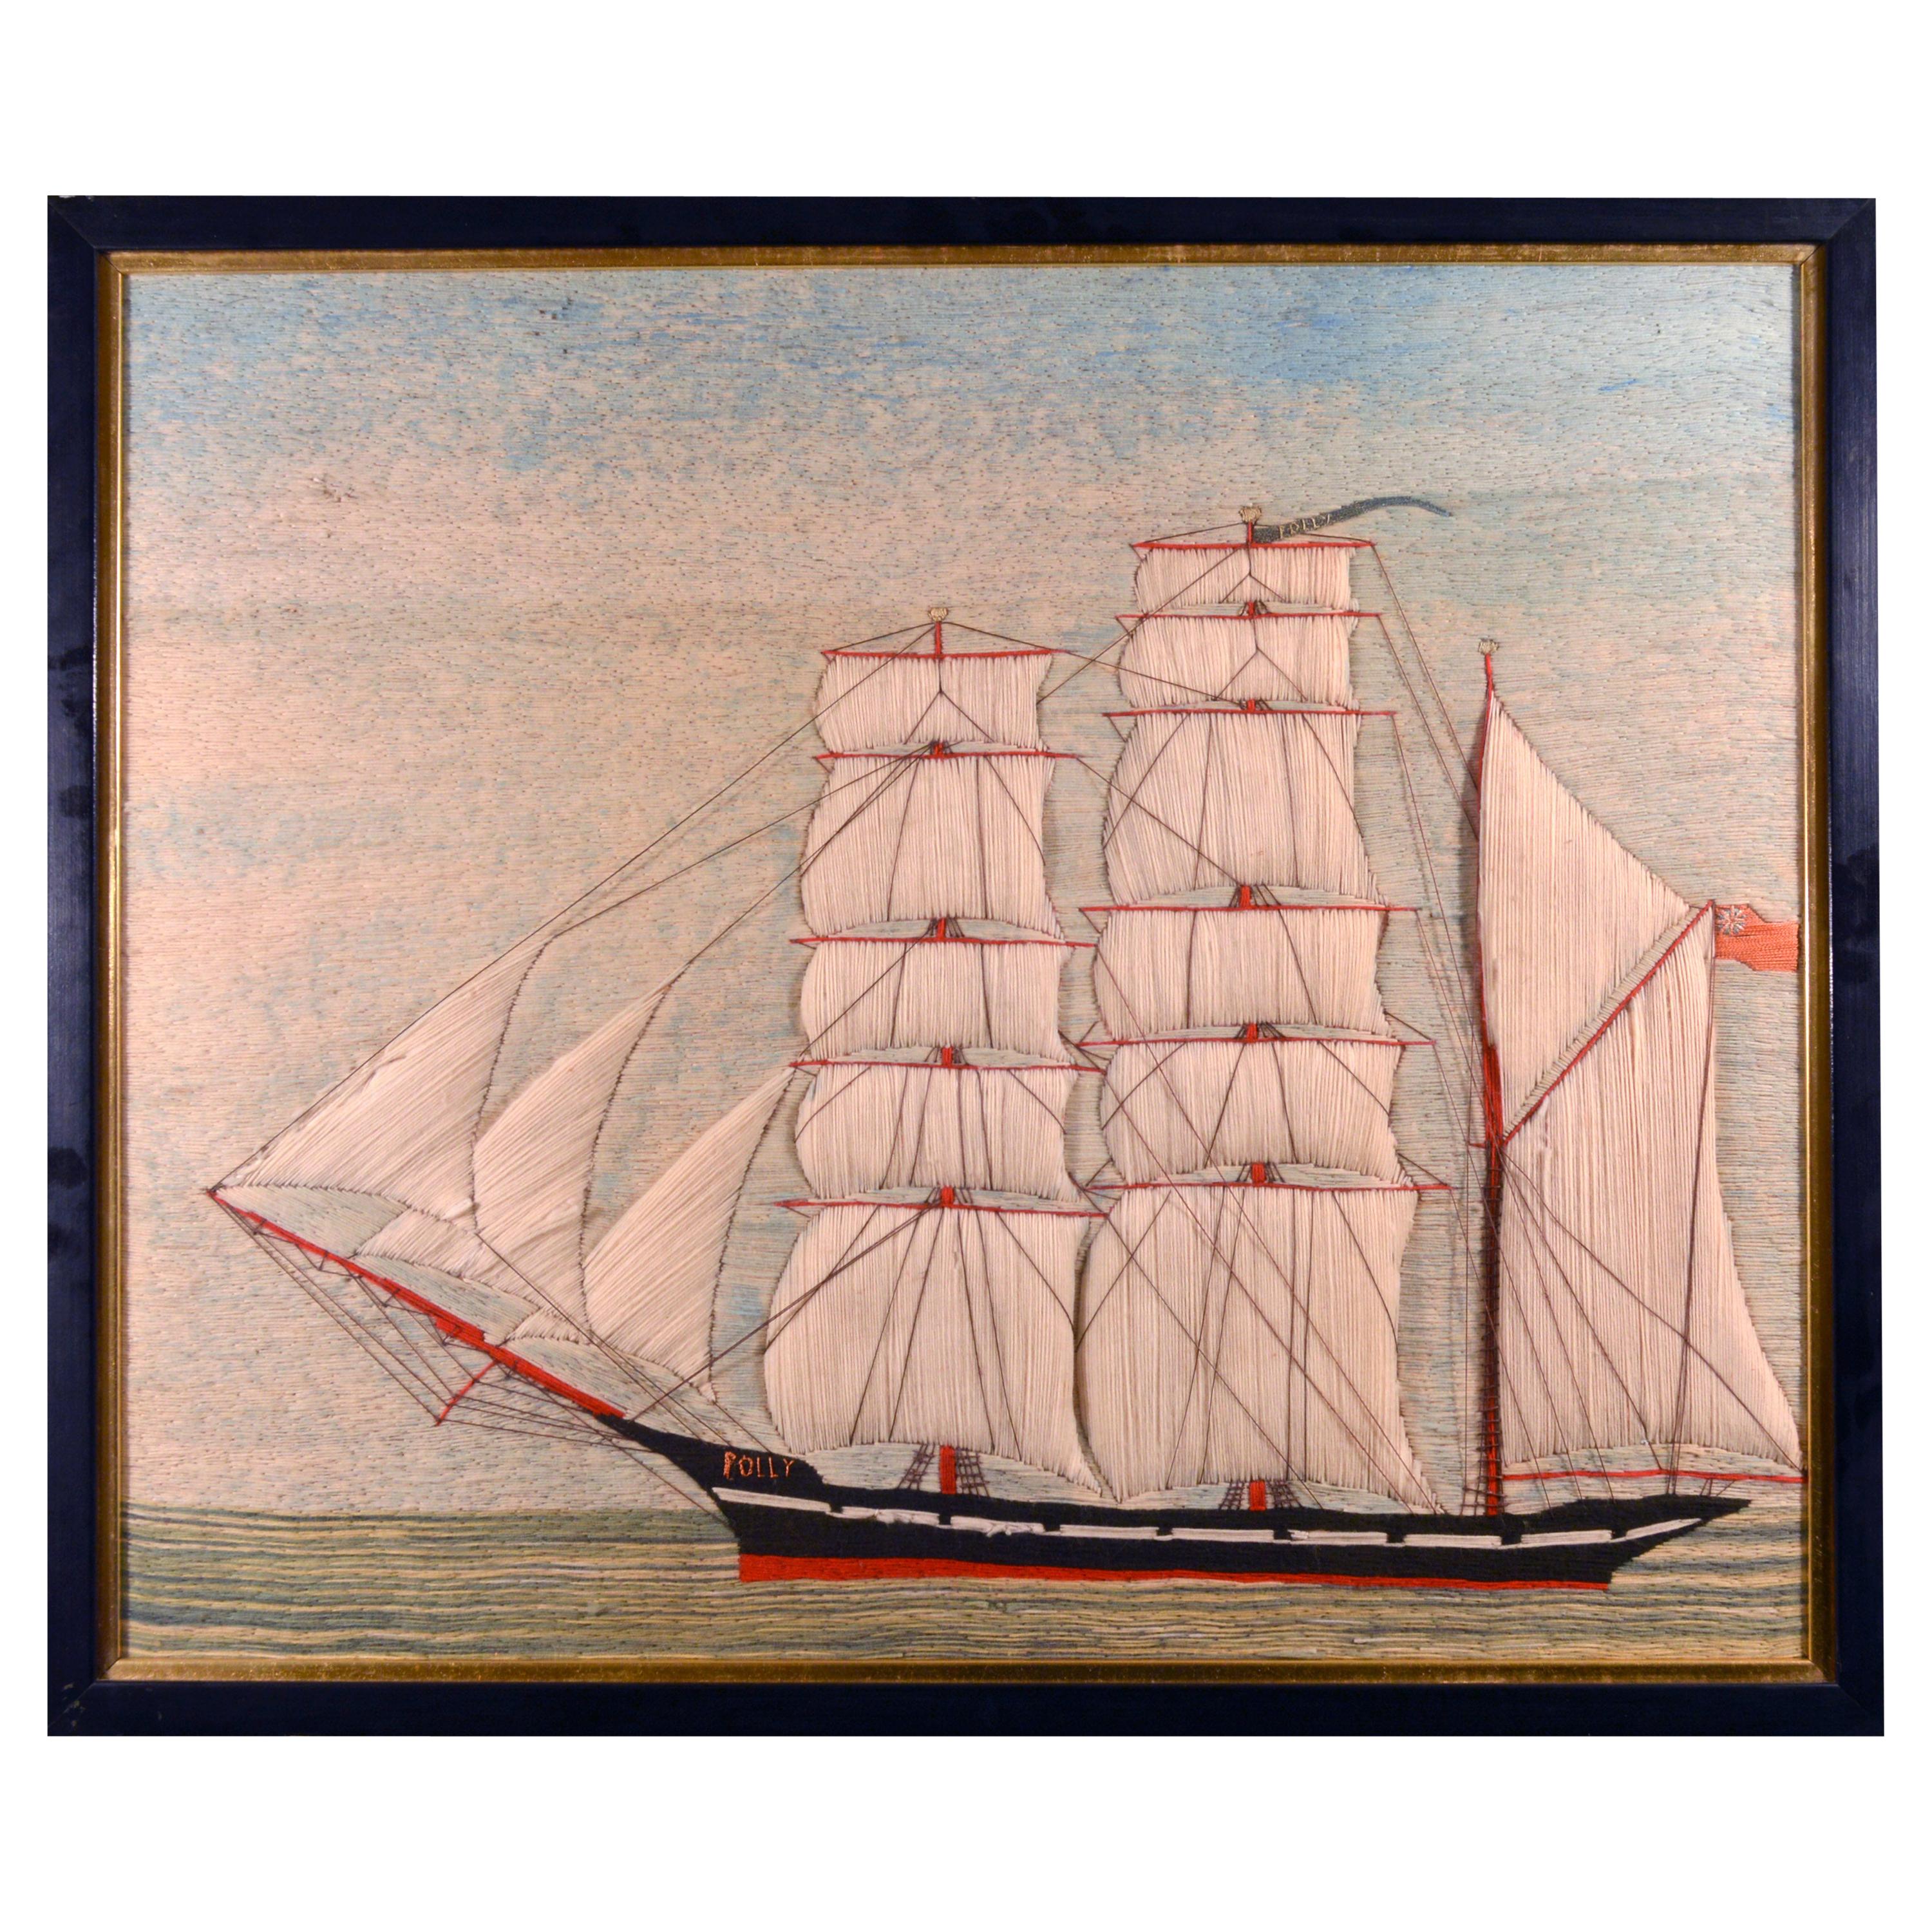 British Sailor's Woolwork or Woolie of the Barque Polly